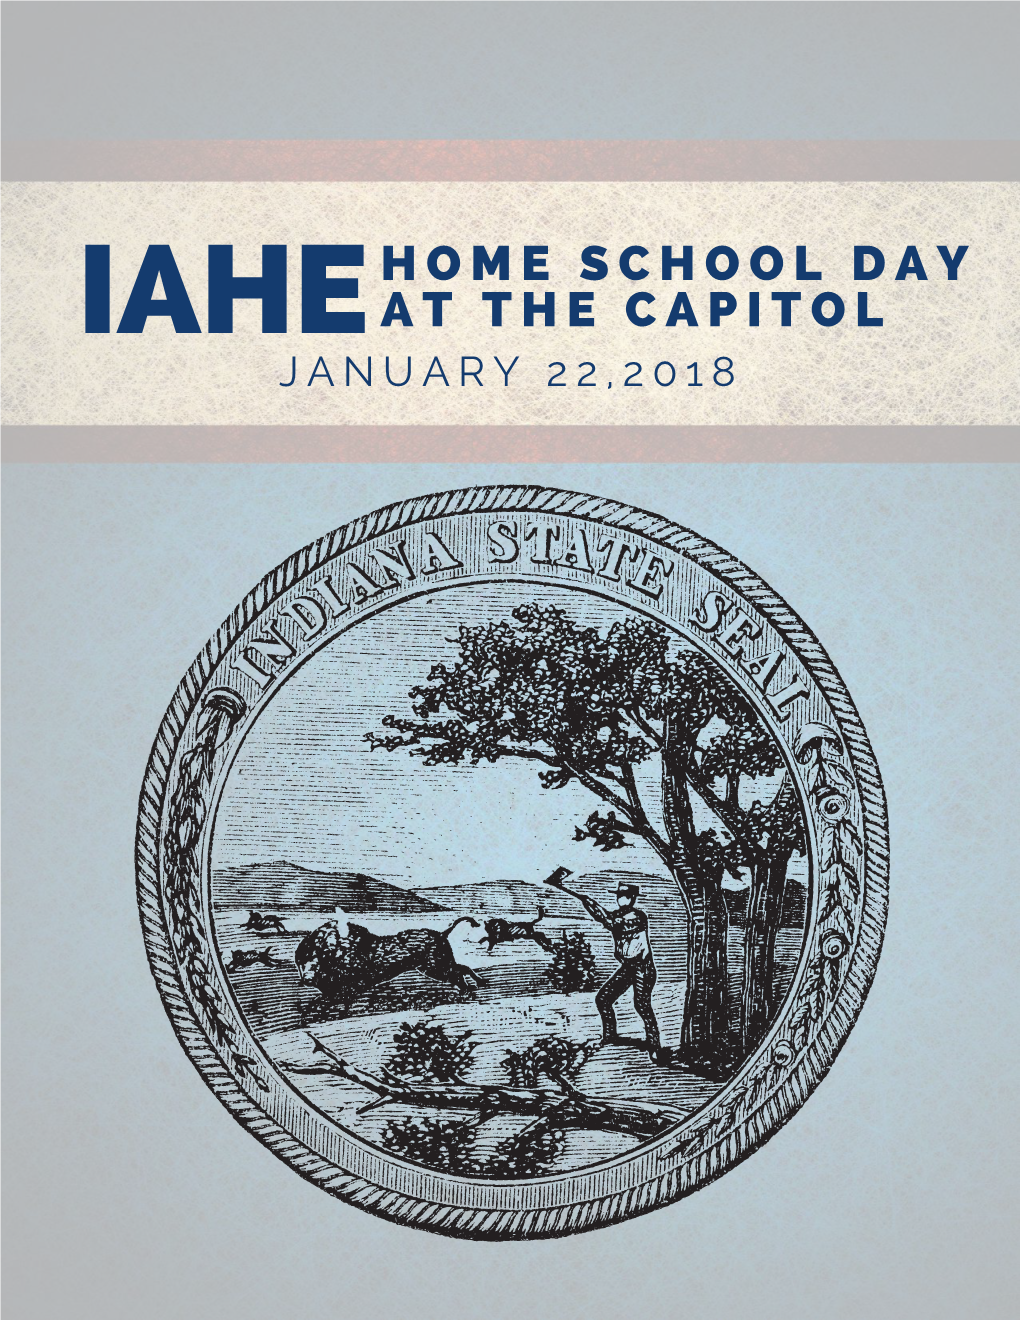 2018 Home School Day at the Capitol